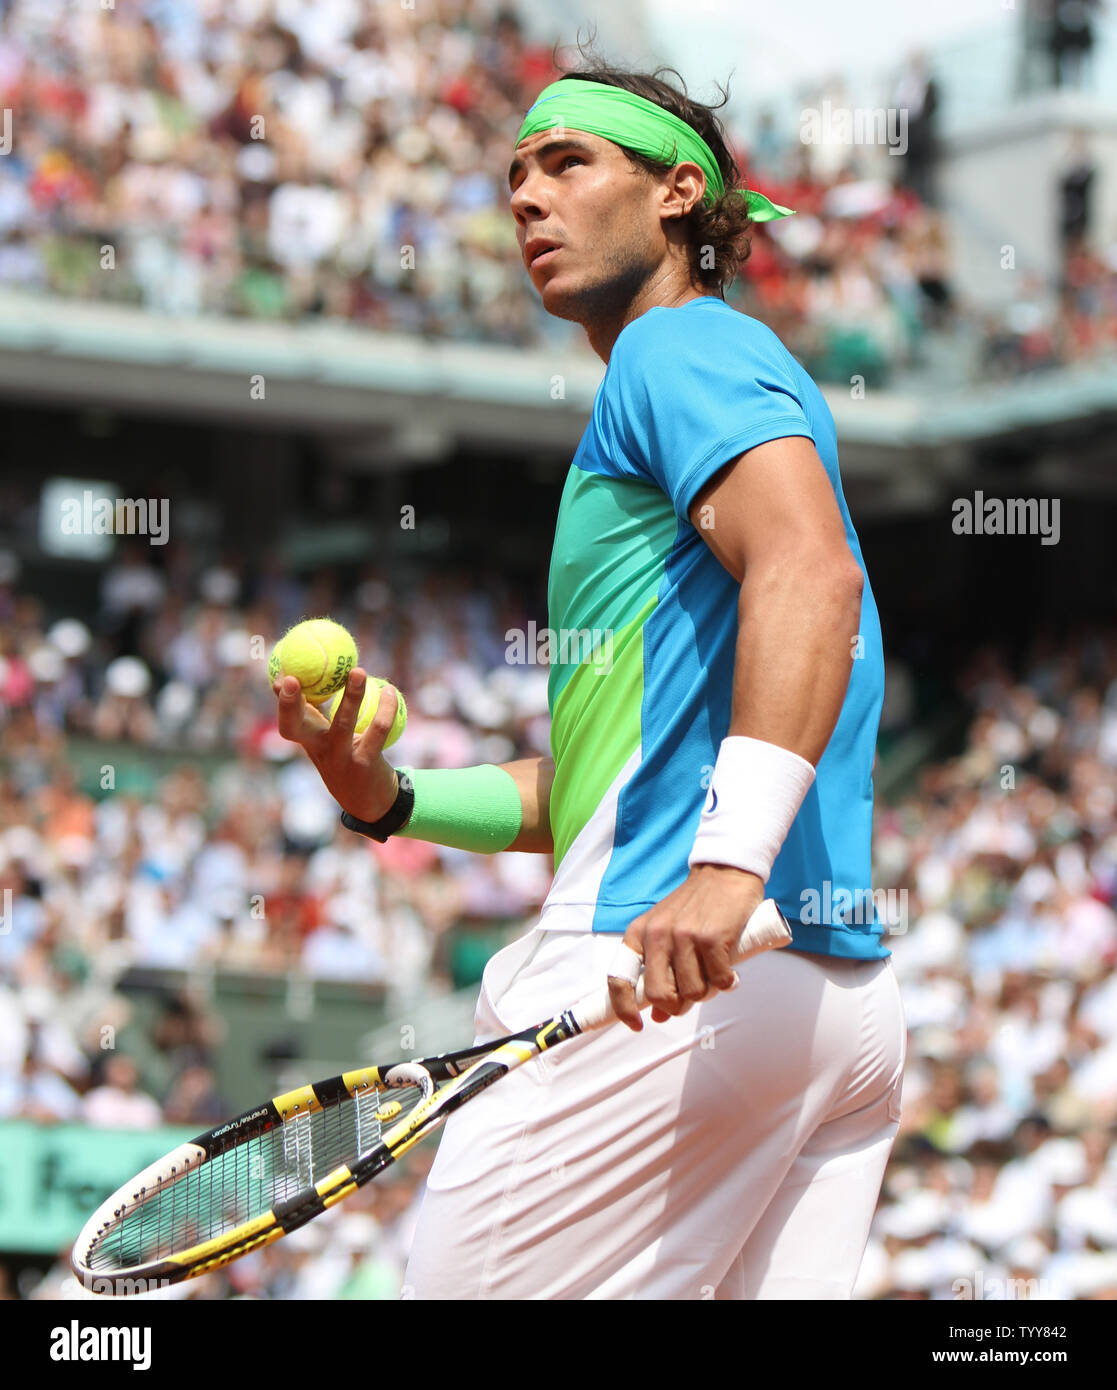 Spaniard Rafael Nadal pauses between points during his French Open mens  final match against Swede Robin Soderling at Roland Garros in Paris on June  6, 2010. Nadal defeated Soderling 6-4, 6-2, 6-4